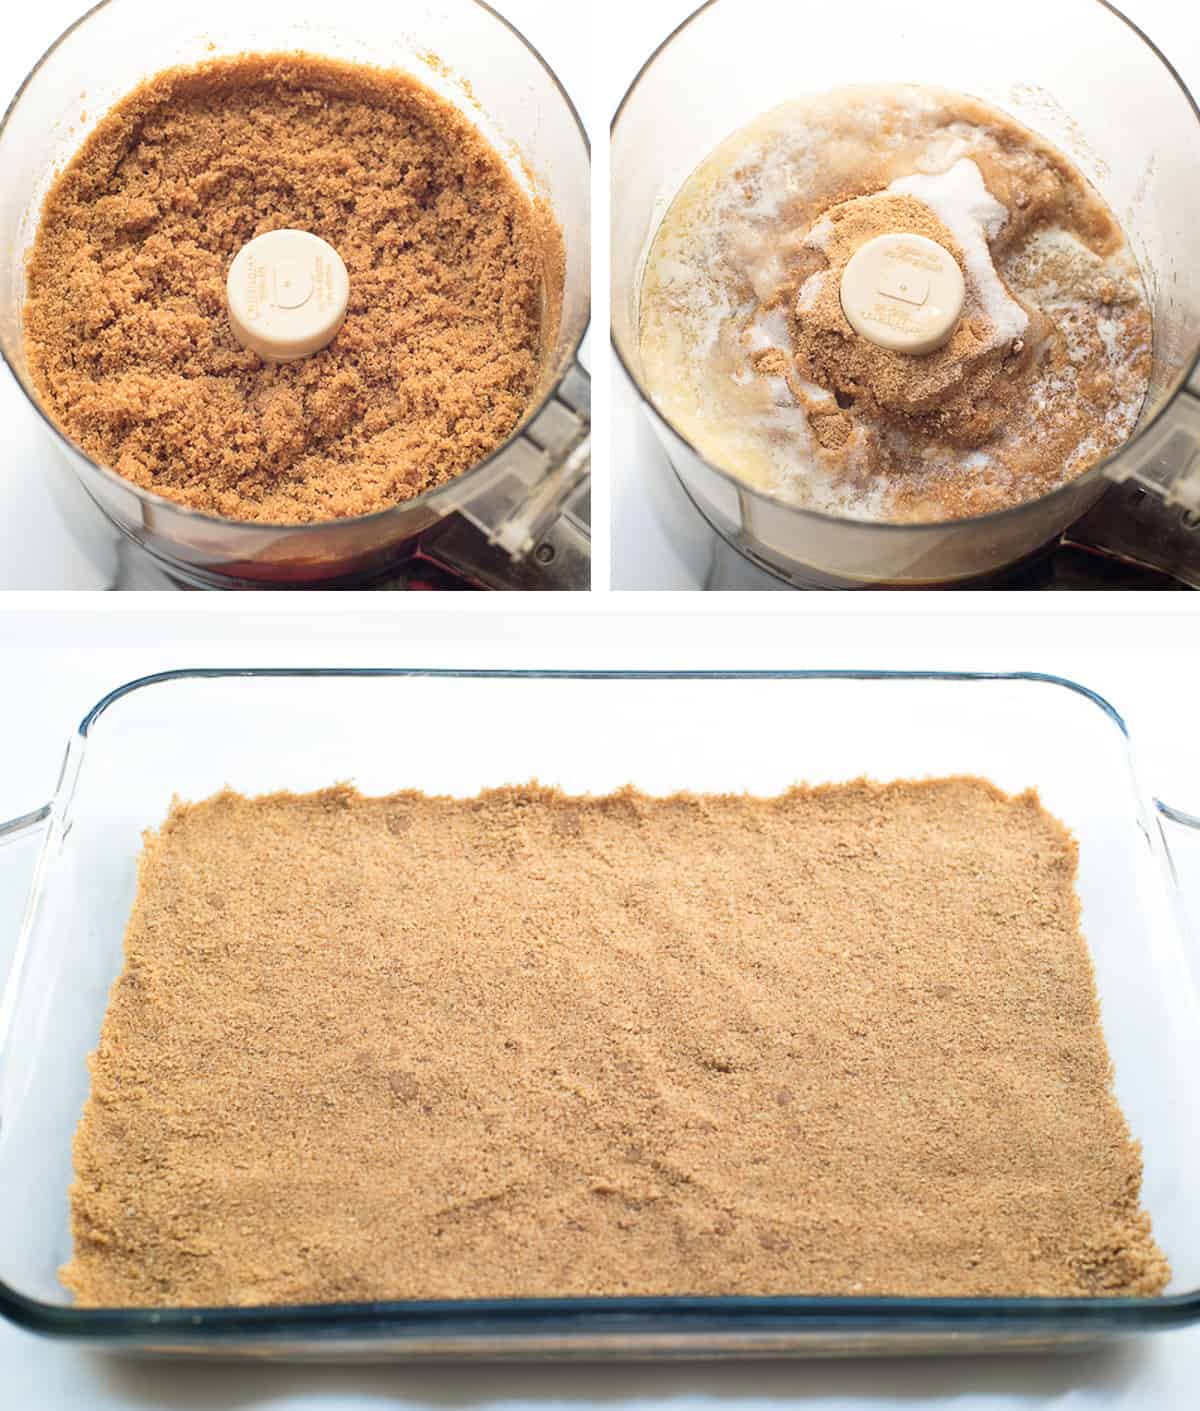 Three images of graham cracker crust in a food processor and pressed in a baking dish.